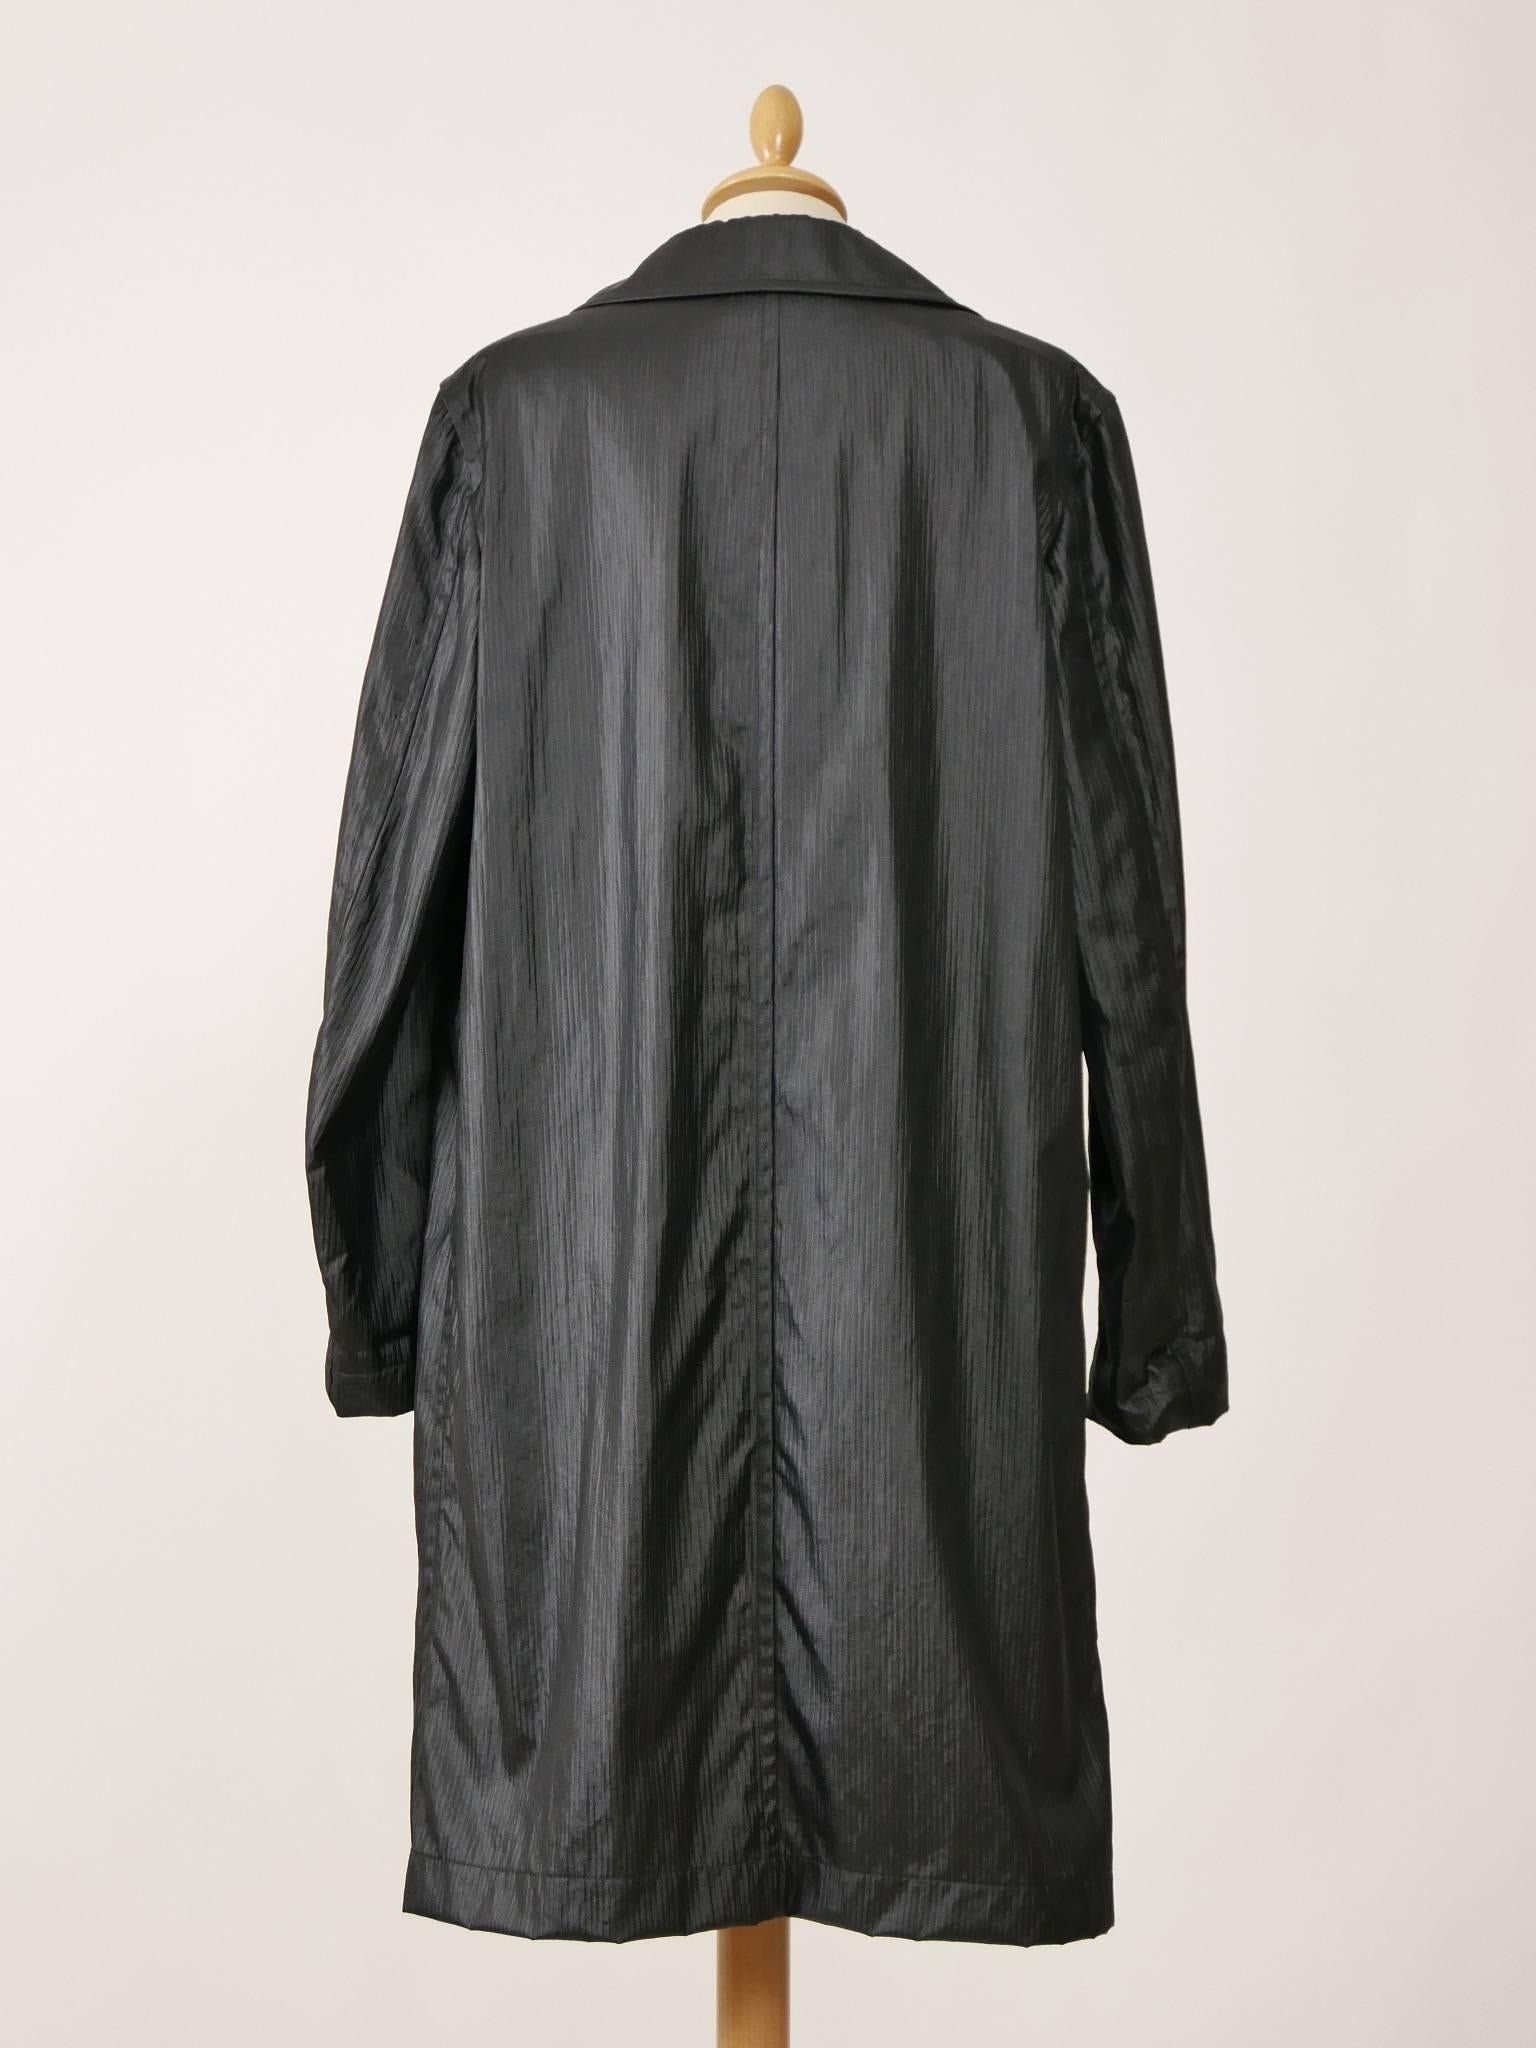 COMME des GARCONS Black Satin Deconstruction Overcoat In Excellent Condition In Milan, Italy